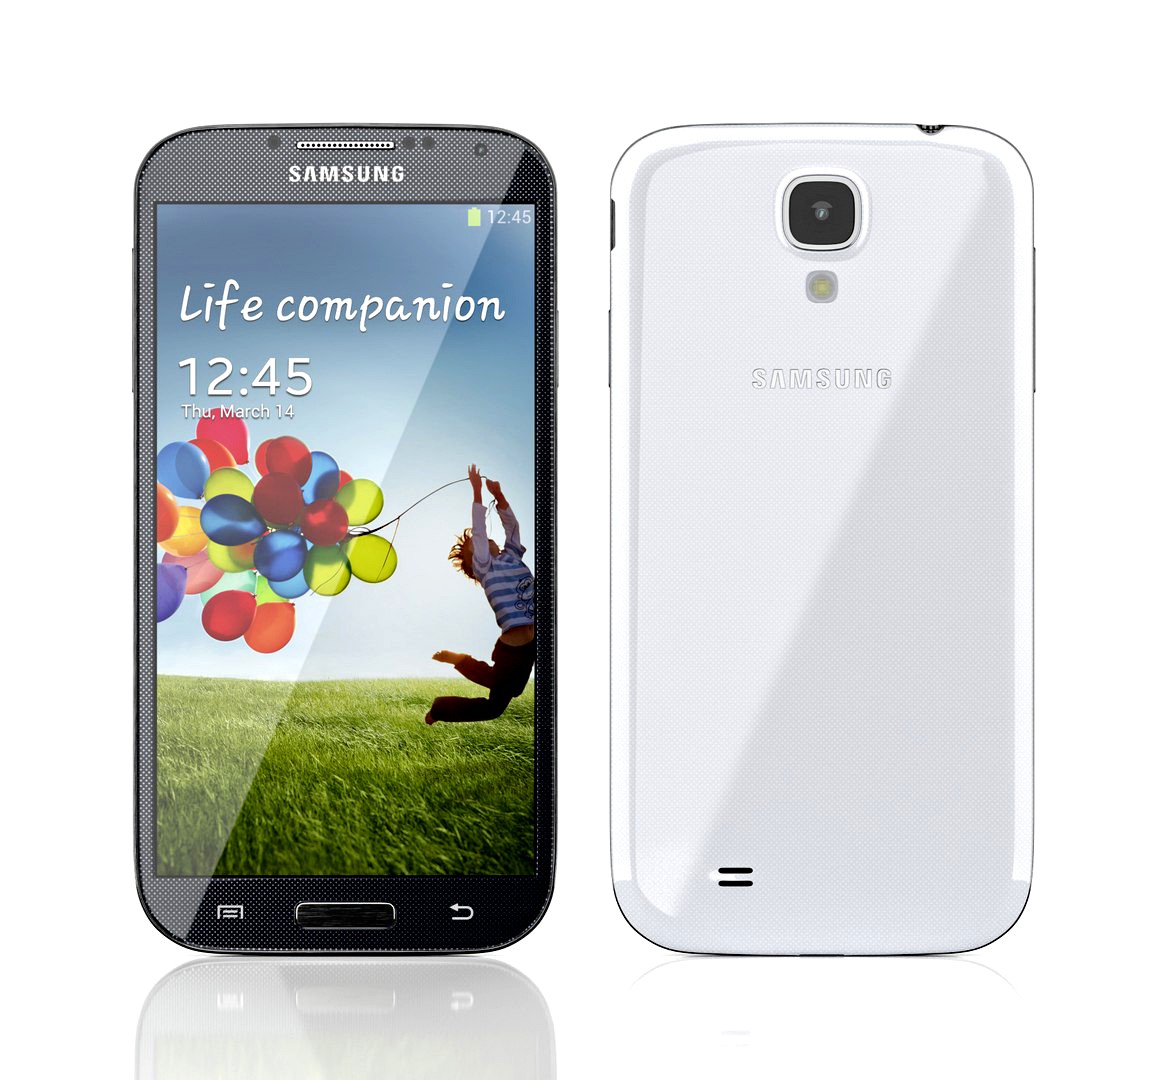 Samsung Galaxy S4 both black and white versions